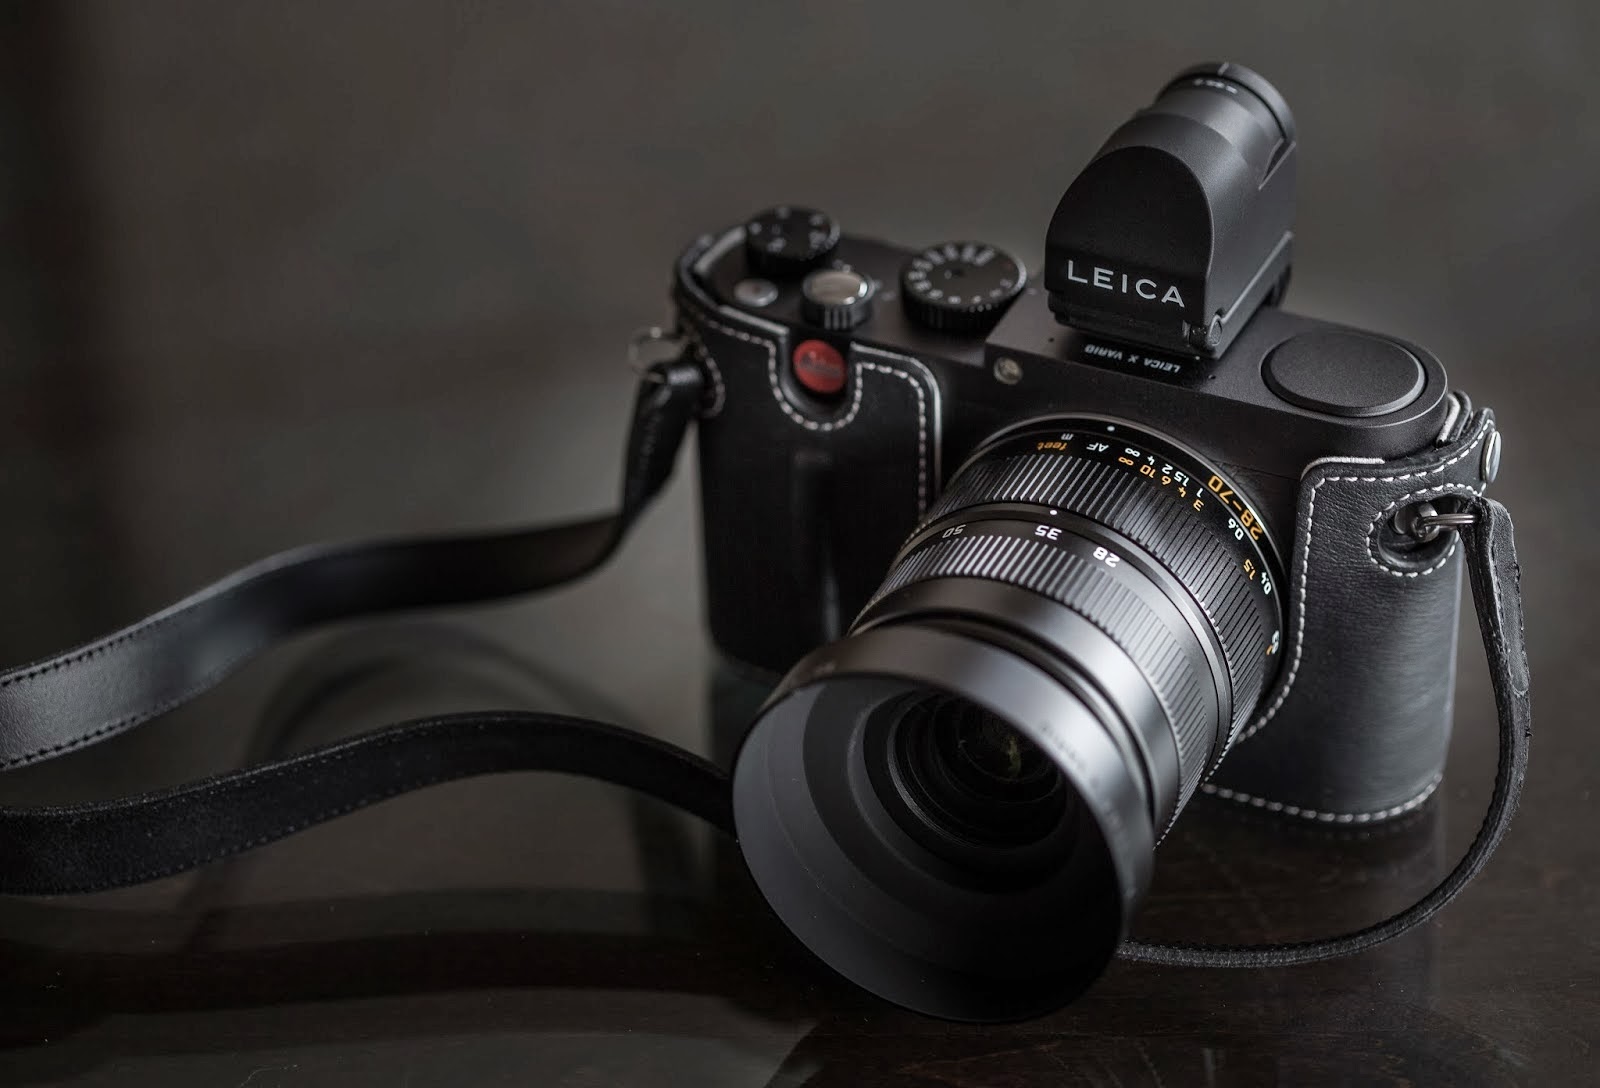 http://rodriguezahr.blogspot.in/2014/01/leica-xvario-camera-to-fall-in-love-with.html